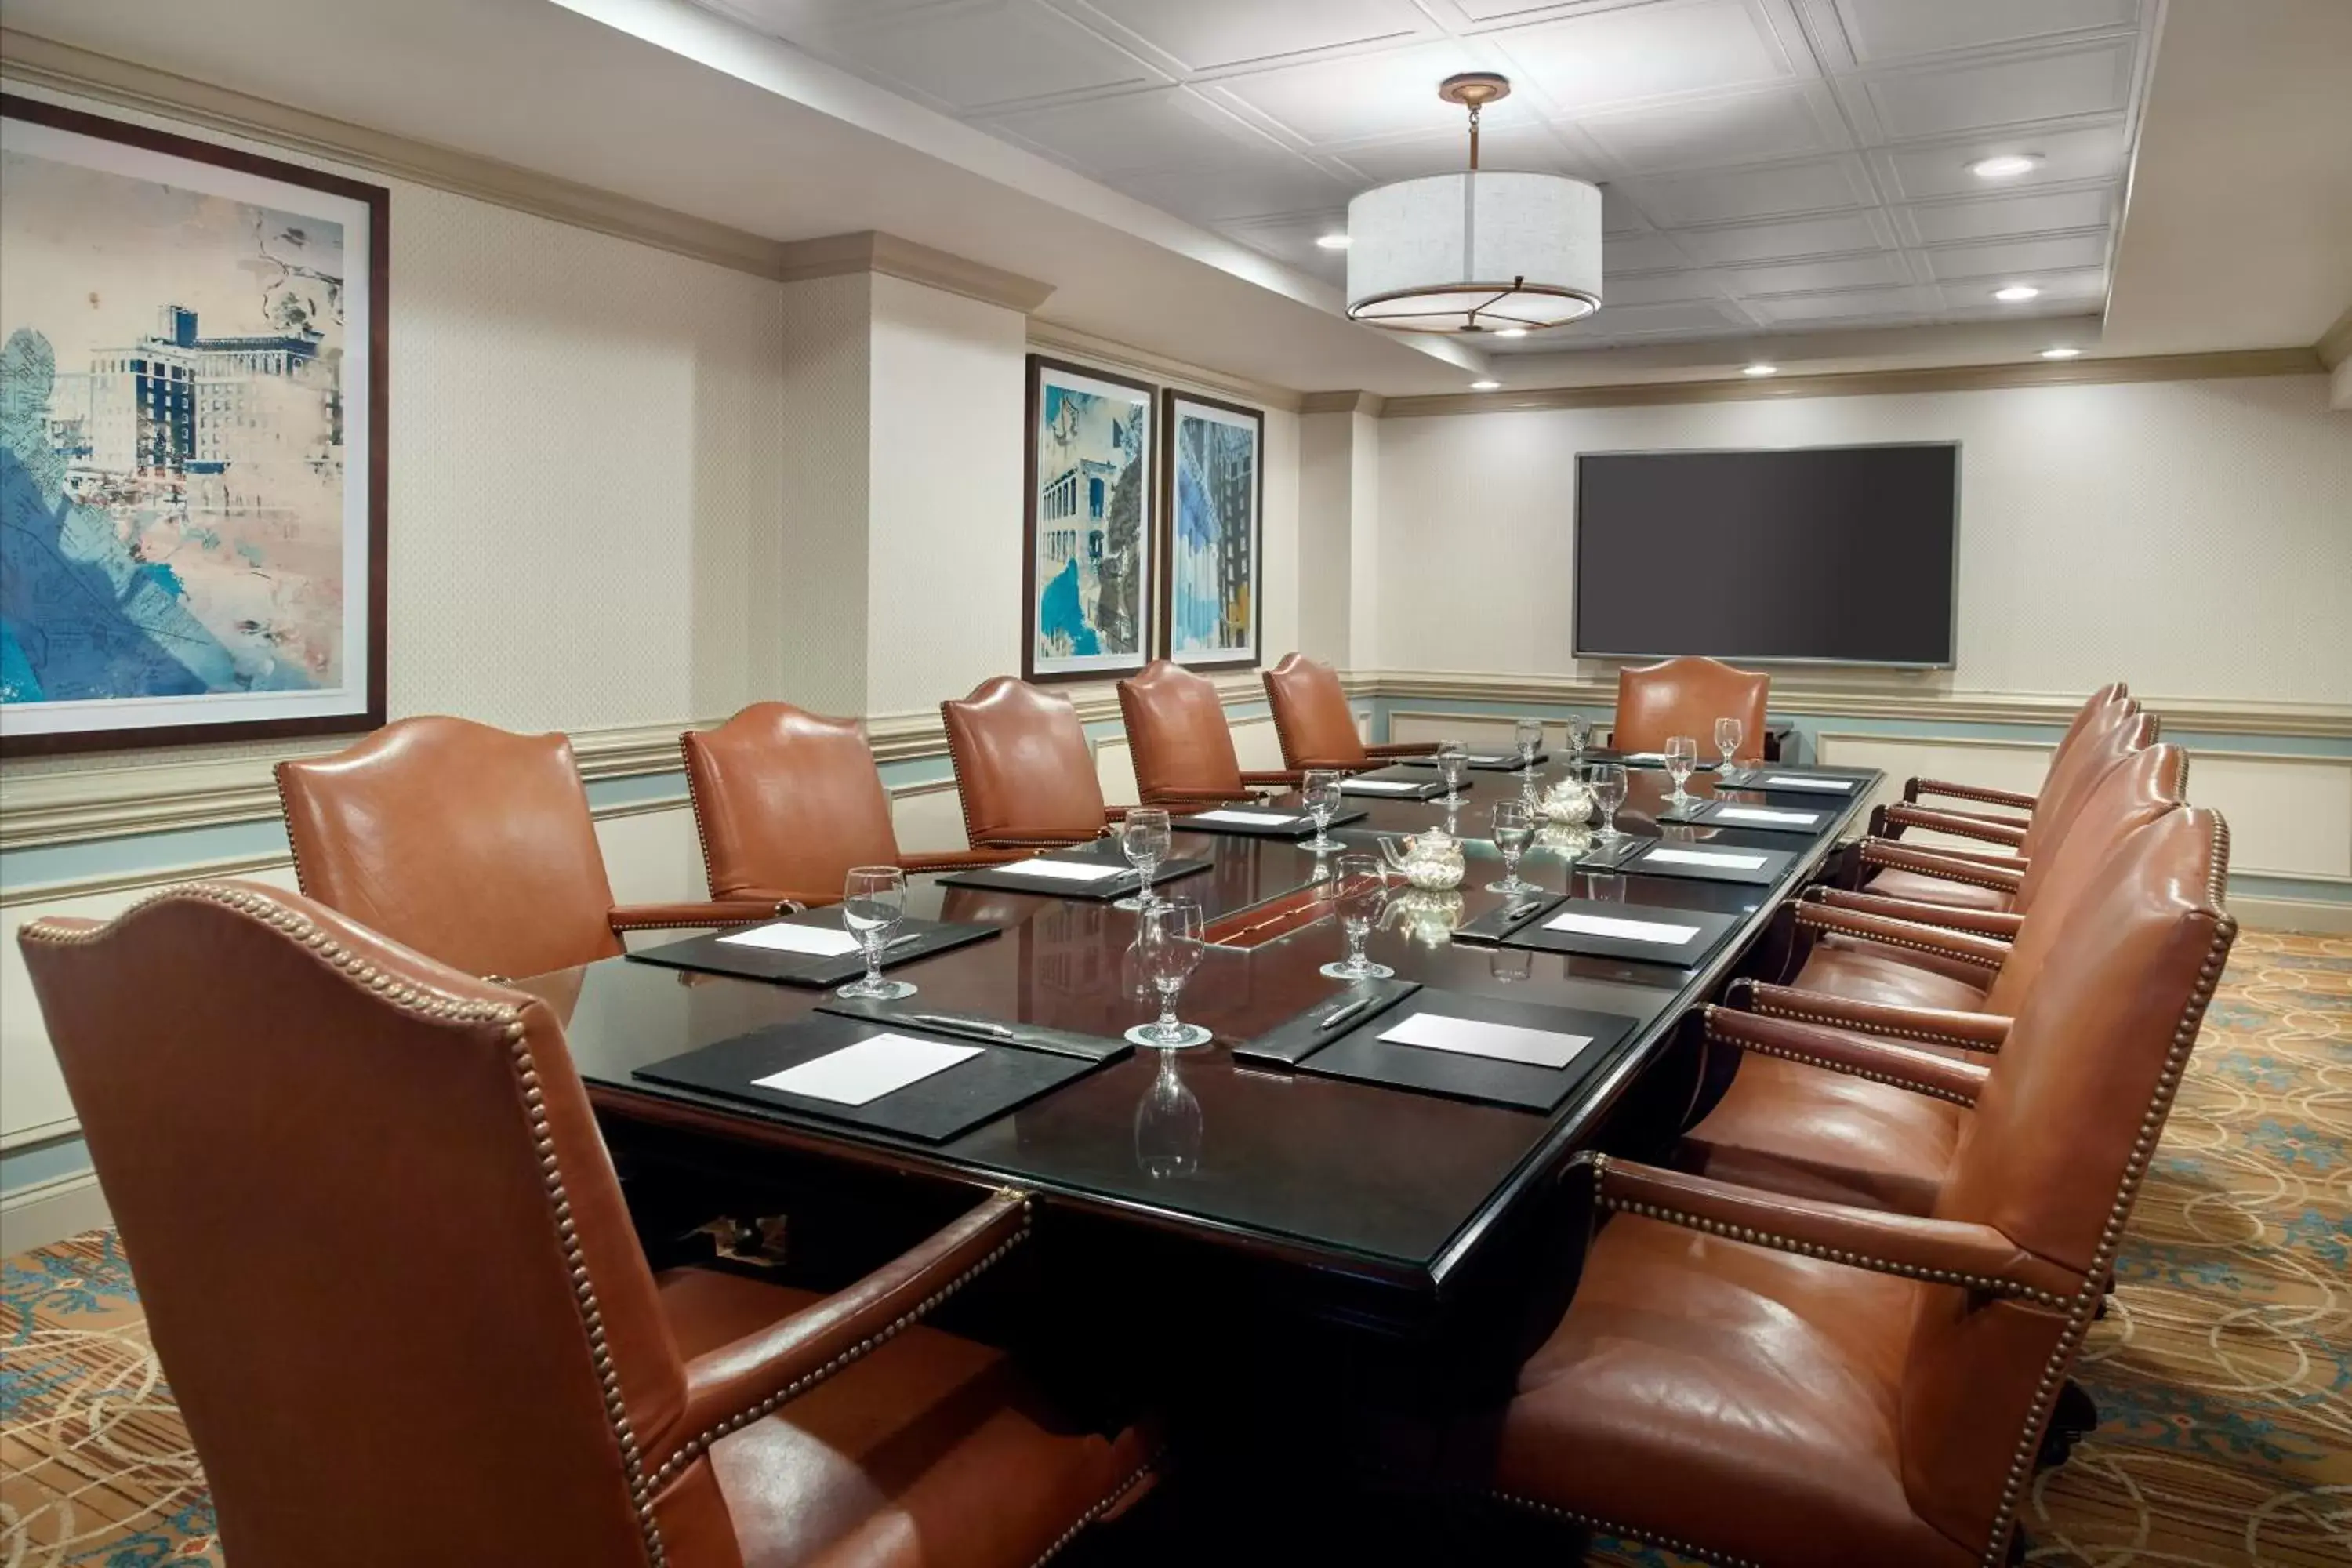 Meeting/conference room in The Westin Poinsett, Greenville